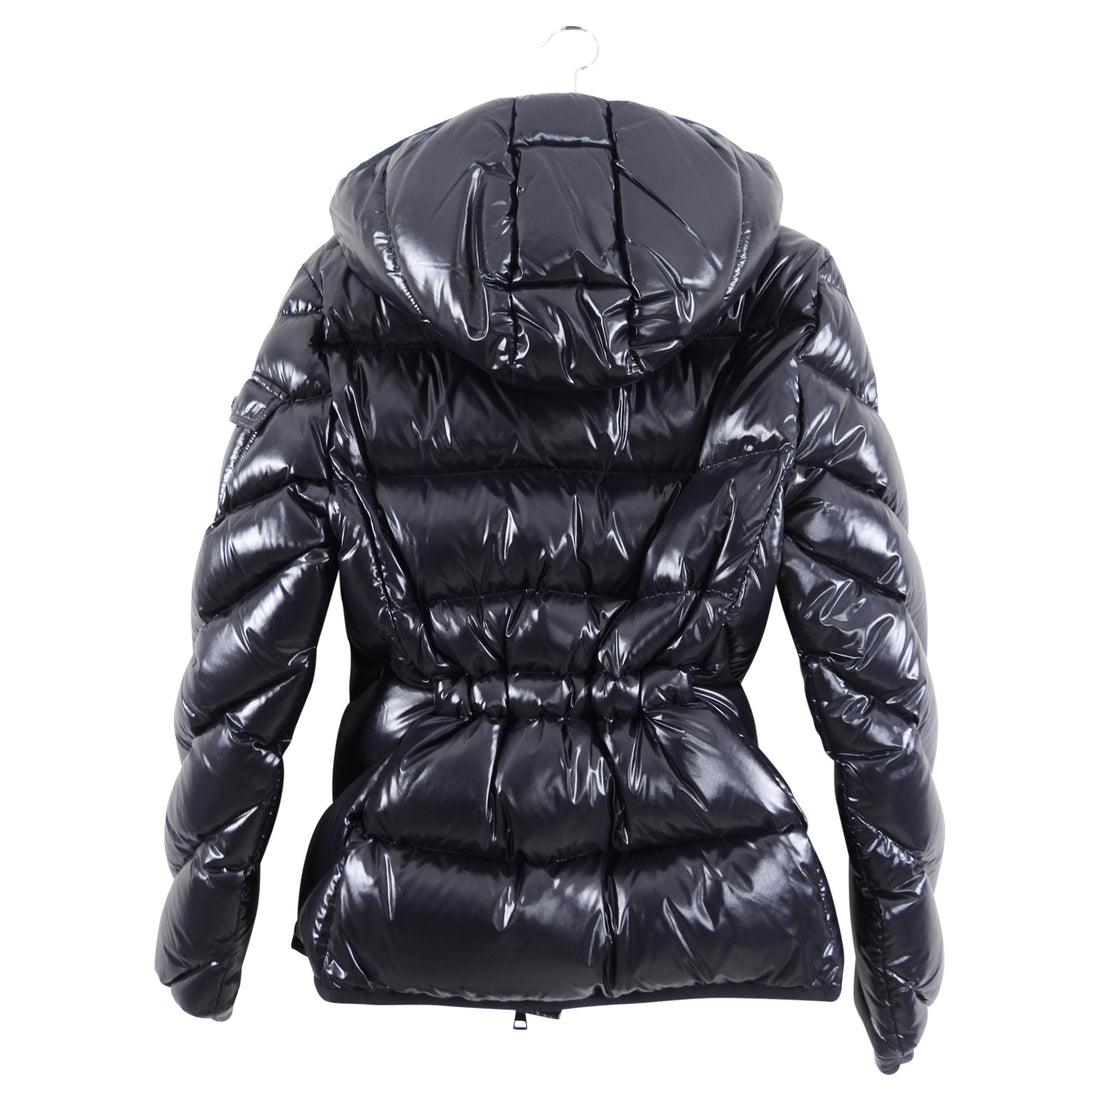 Moncler Shiny Black Puffer Hooded Brouel Jacket - M